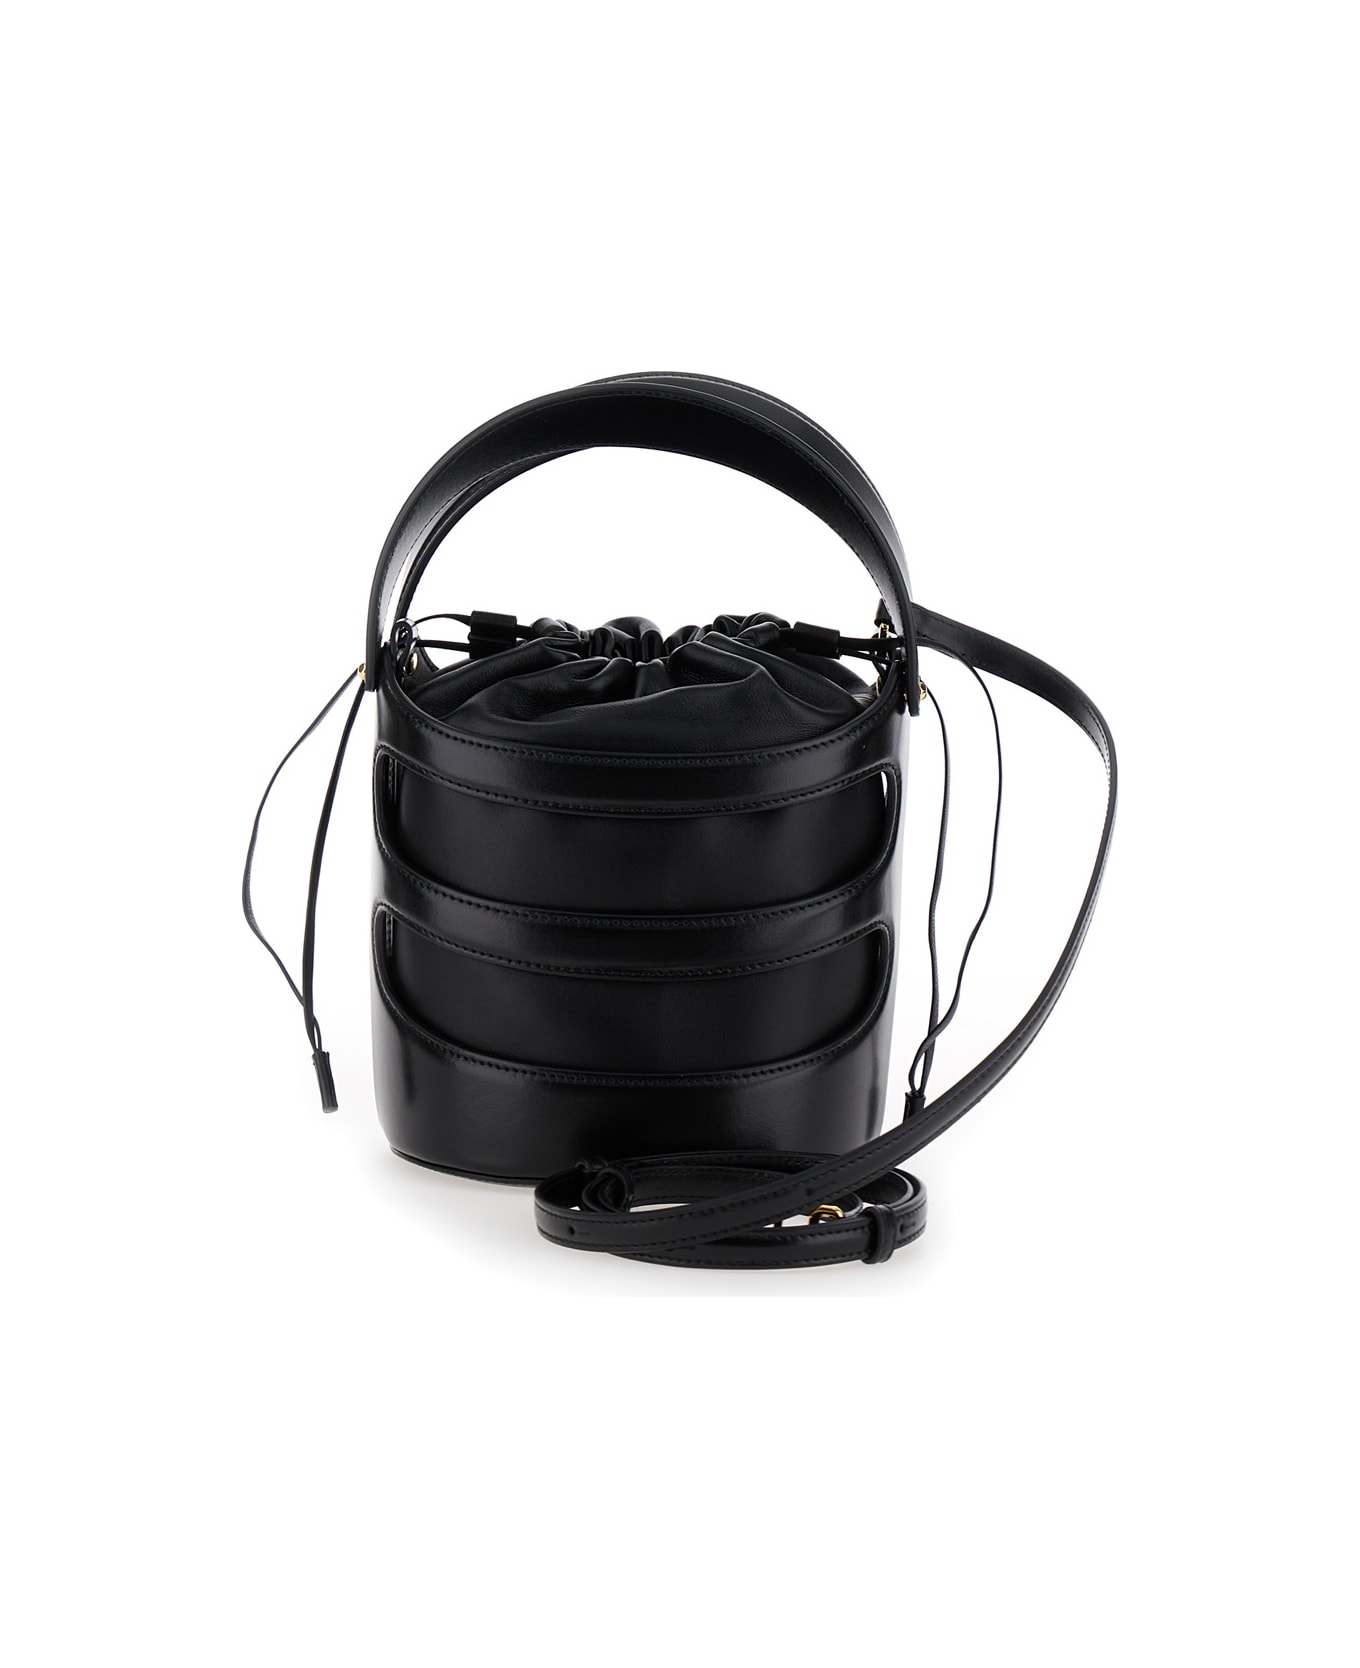 Alexander McQueen 'the Rise' Black Bucket Bag With Harness Cage In Leather Woman - Black